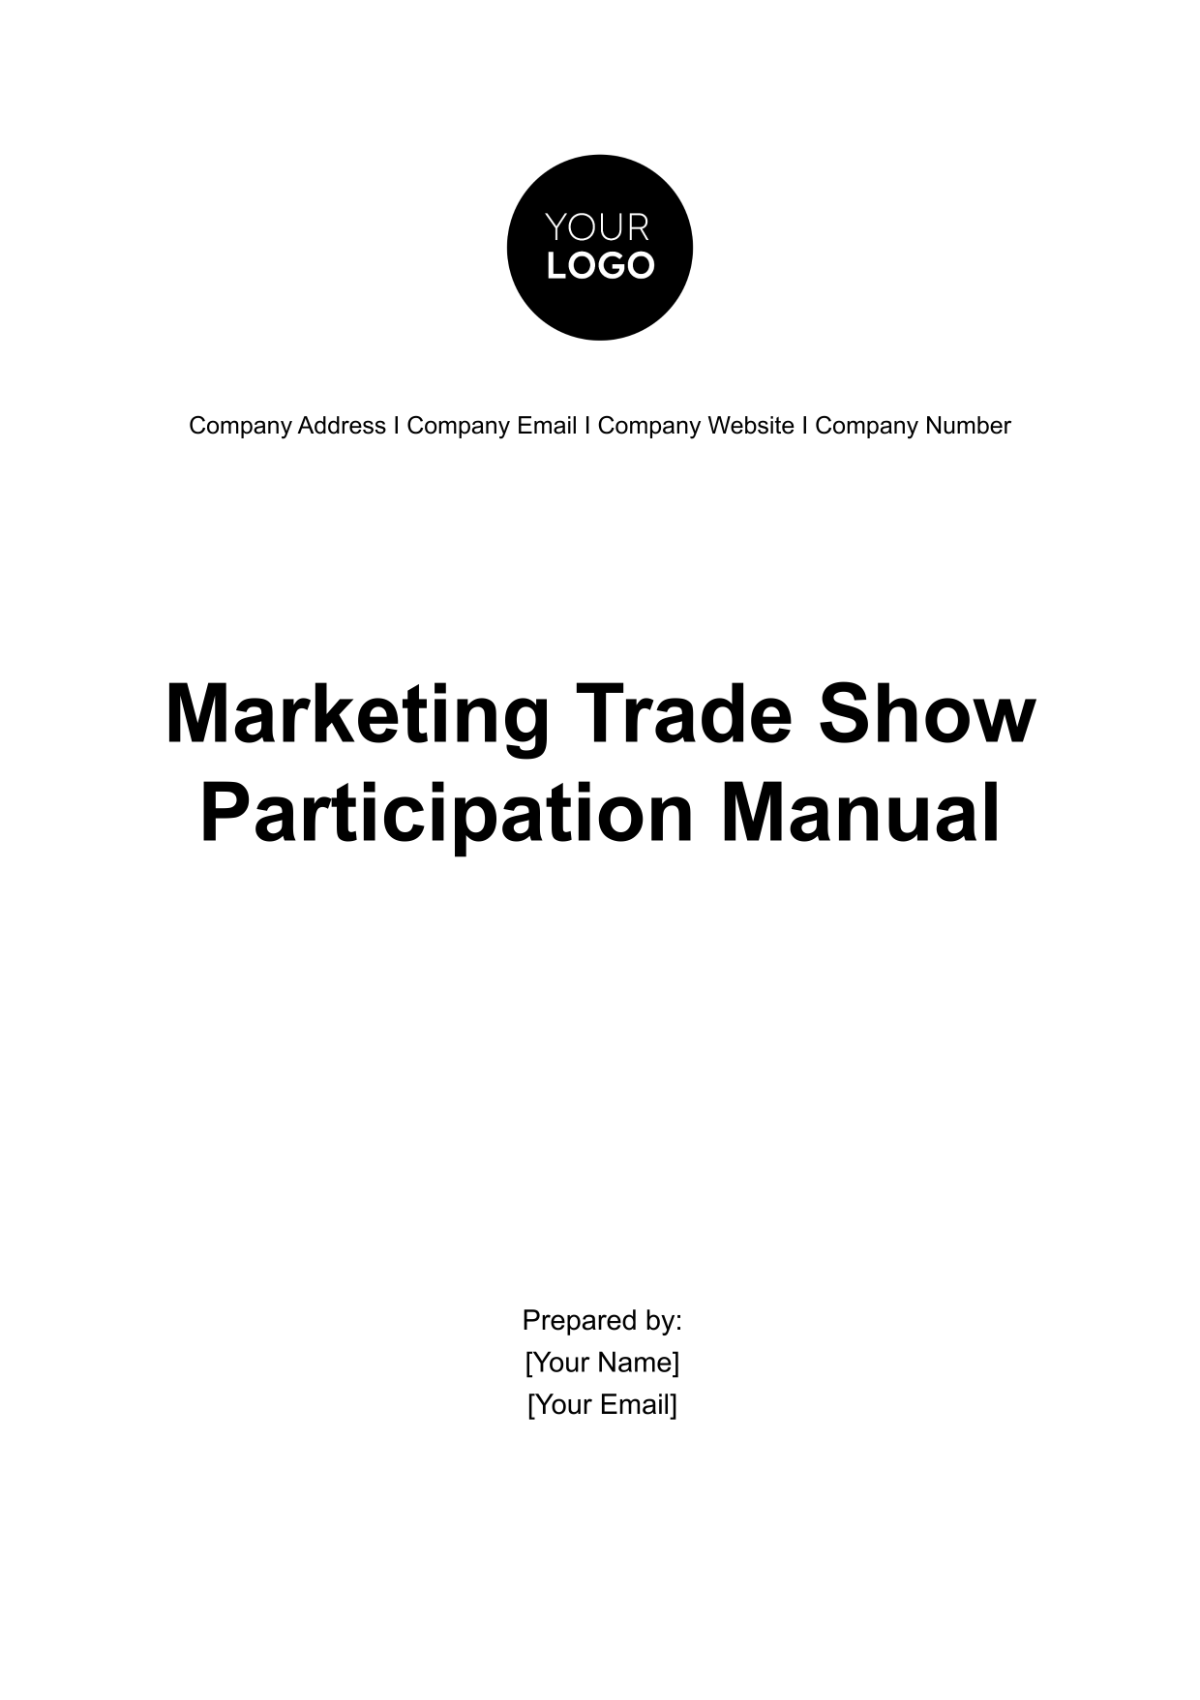 Free Marketing Trade Show Participation Manual Template